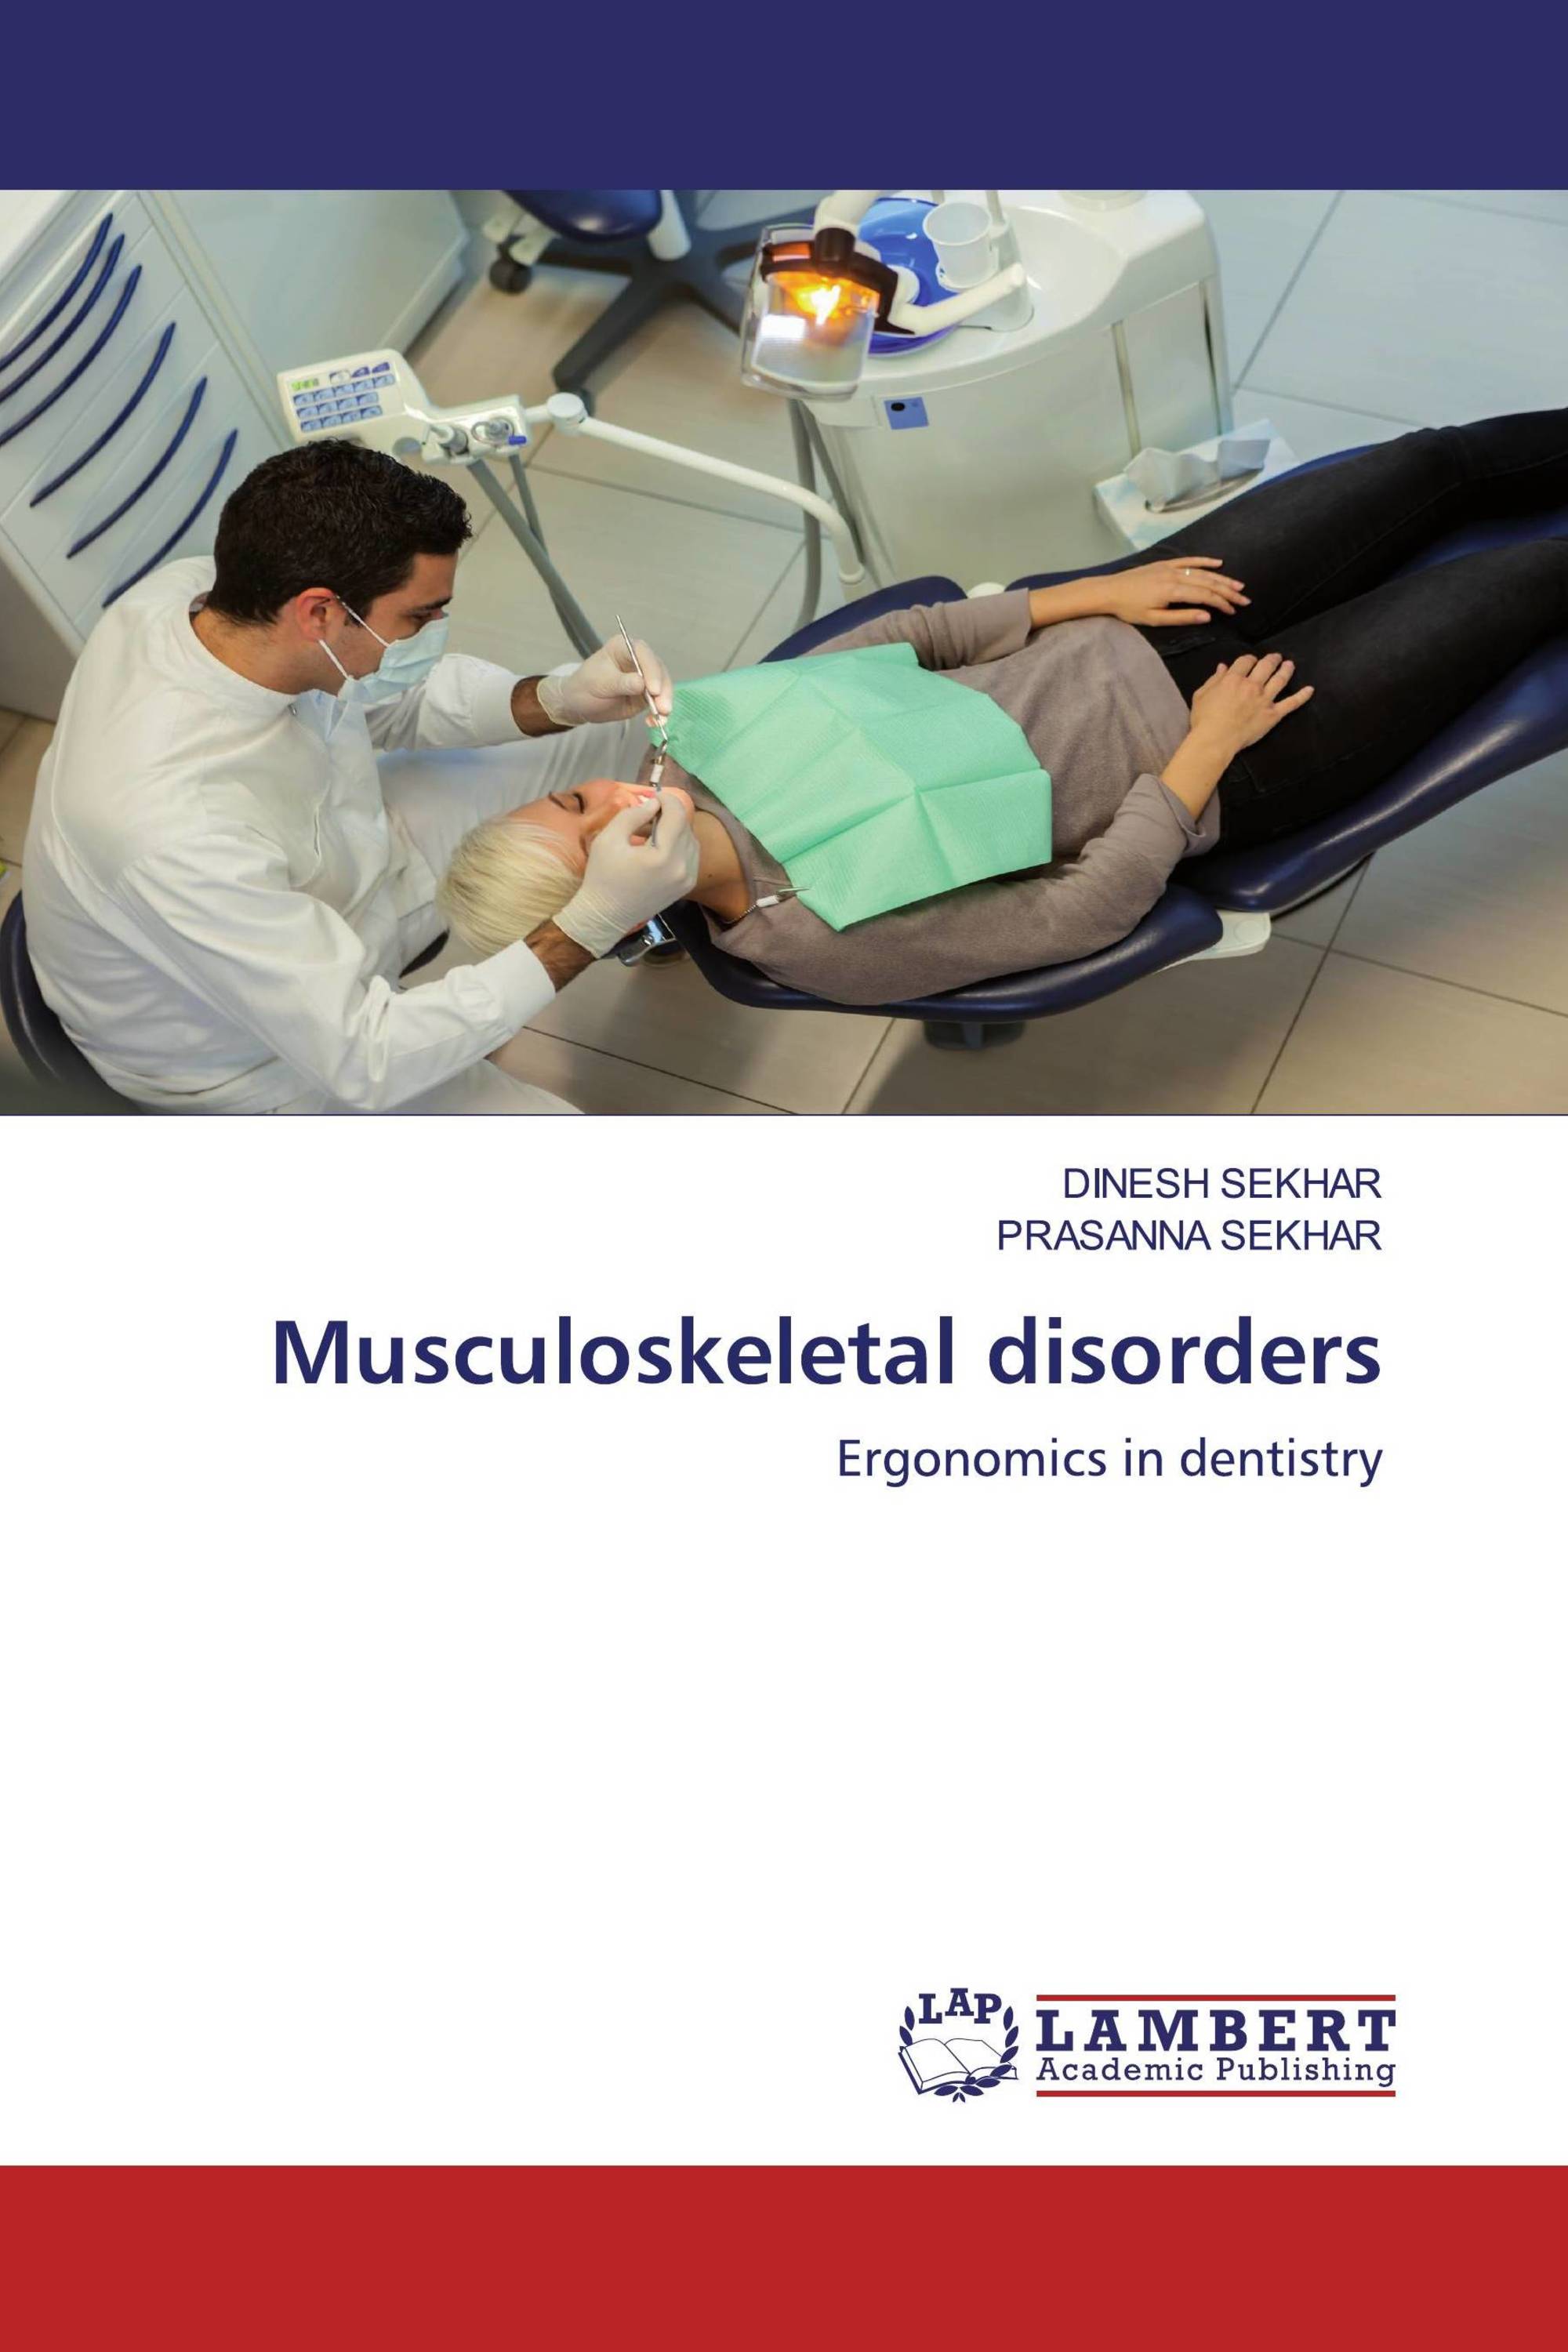 case study 37 musculoskeletal disorders